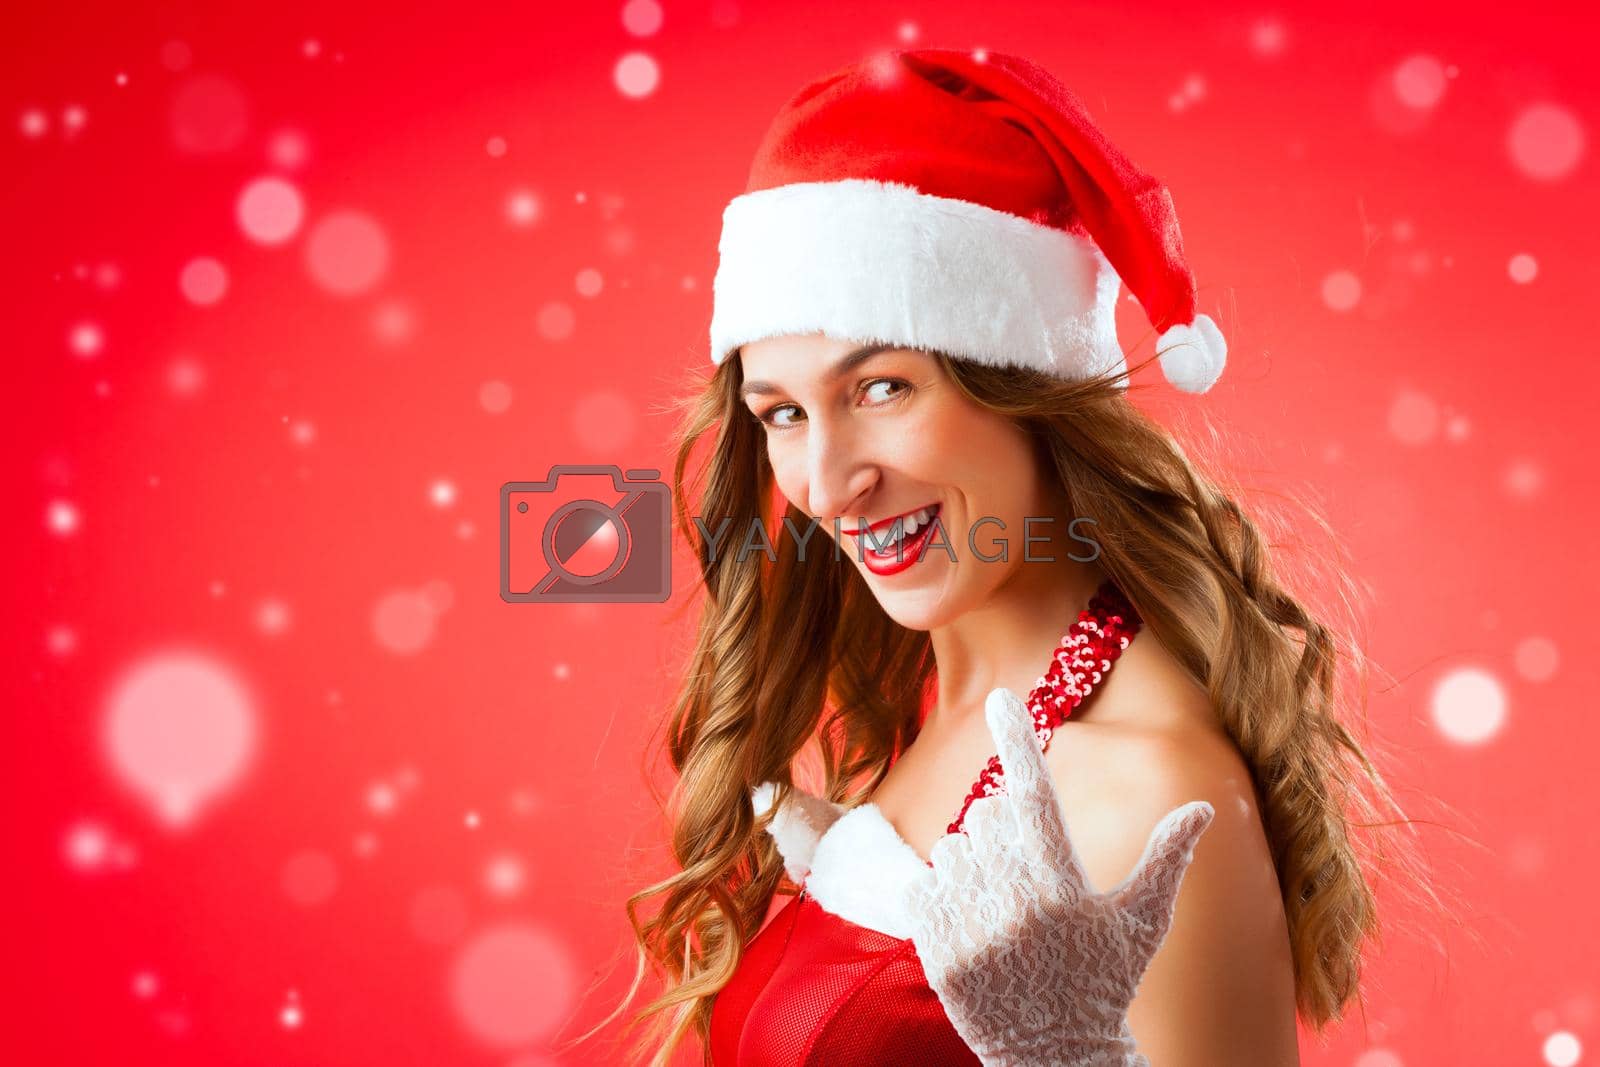 Royalty free image of Attractive young woman in Santa Claus costume alluring gesture by Kzenon